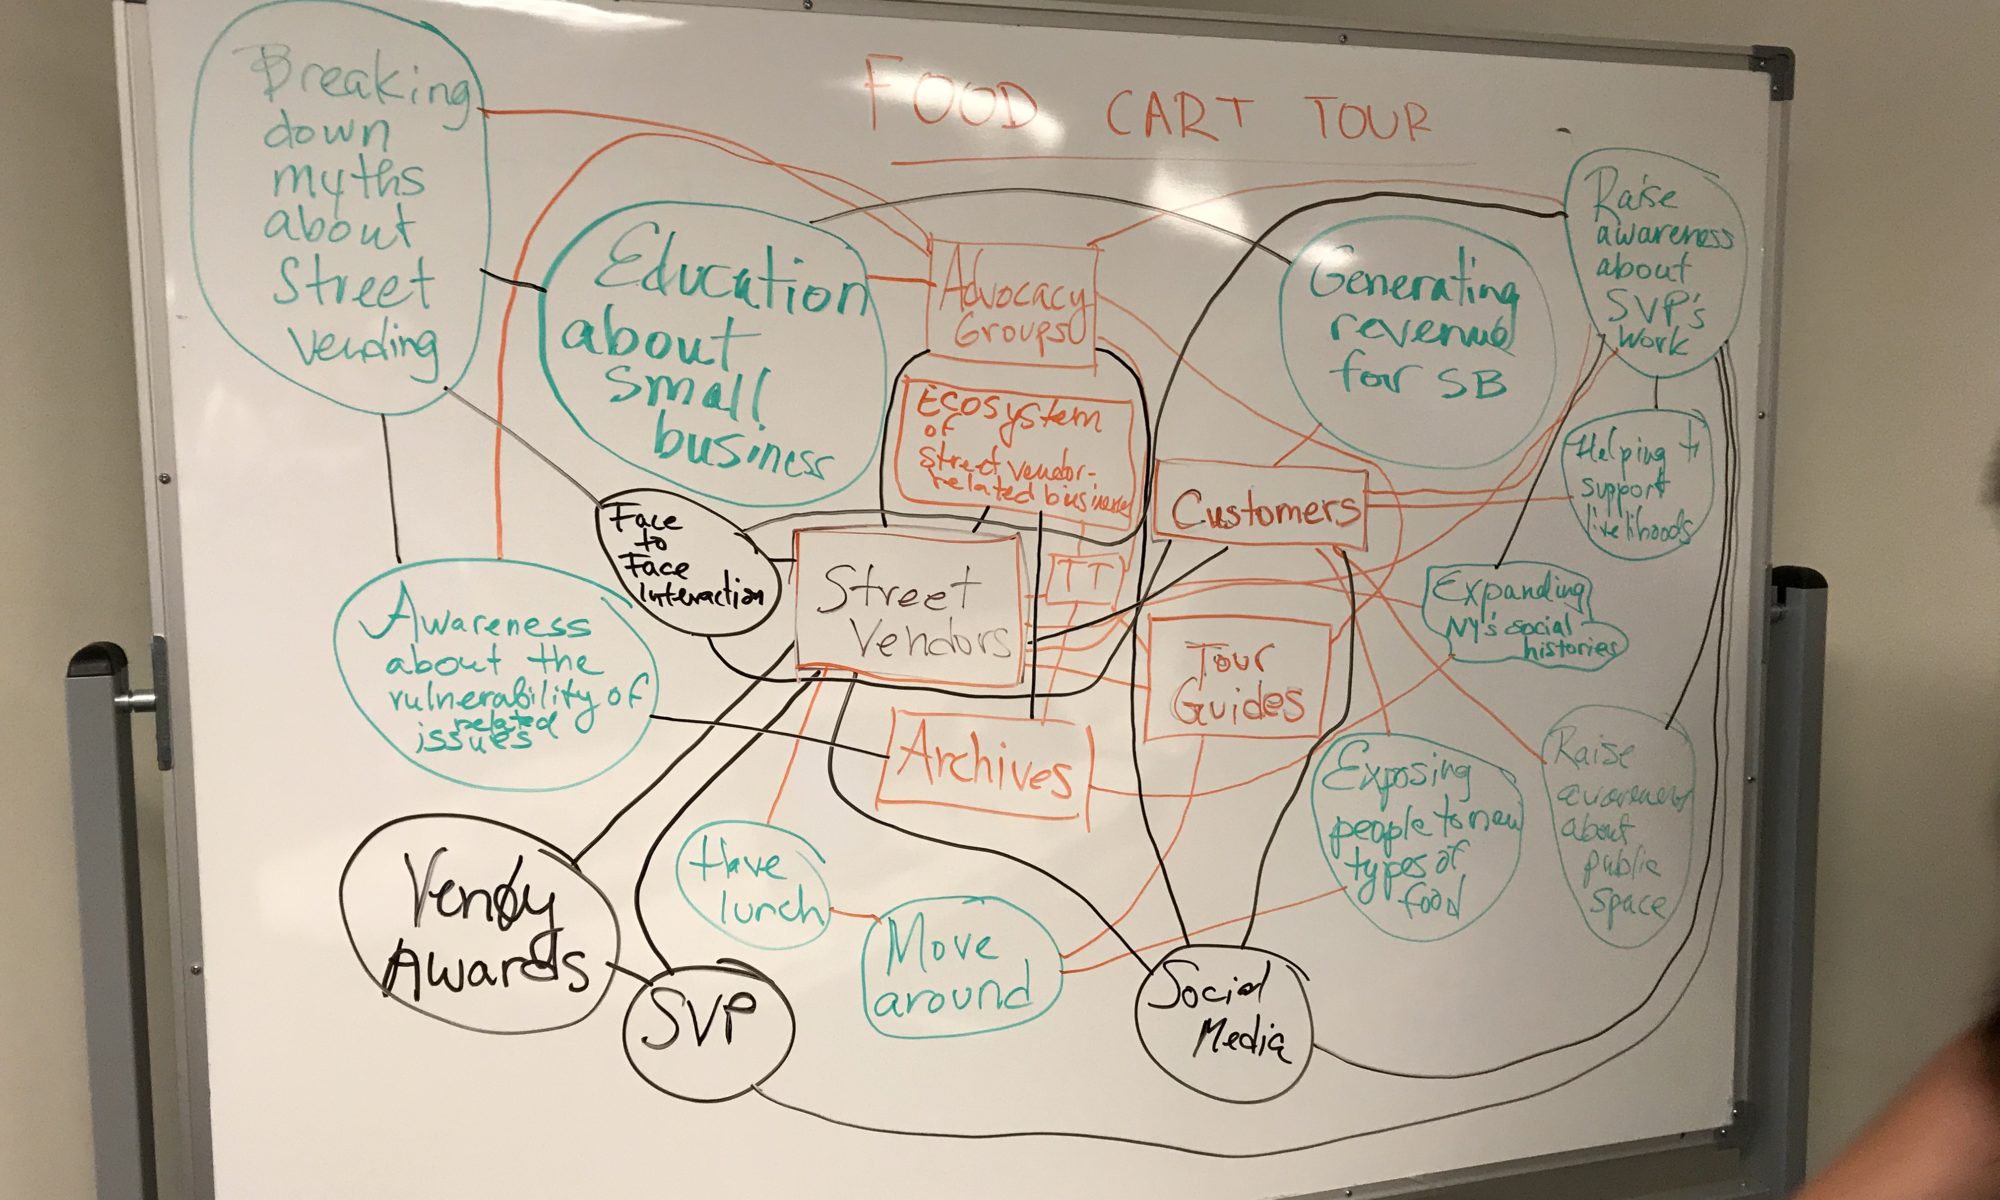 Mind map on a whiteboard of the Food Cart Tour,